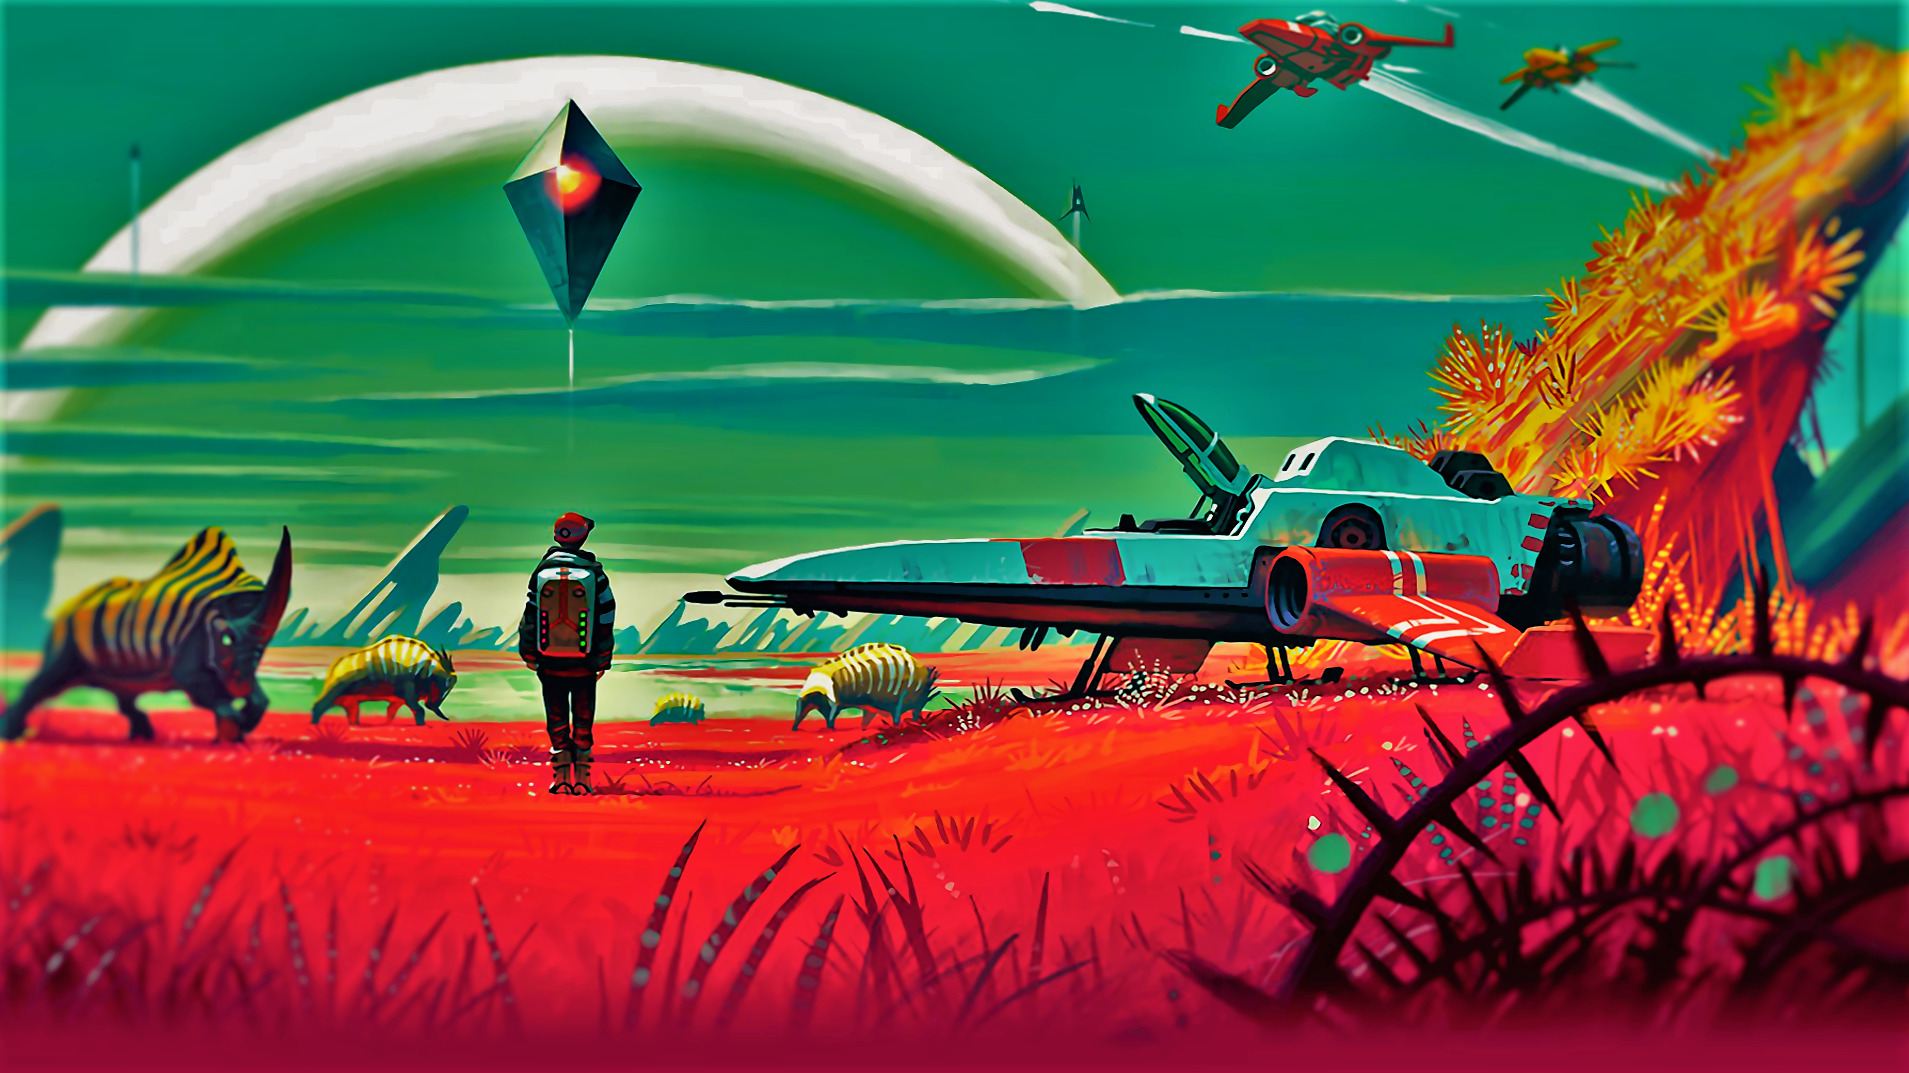 No Mans Sky, Computer game, Video games, Animals, Spaceship, Planet, Stars, Flying saucers, Flying, Green, Pink, Purple, Black, Bright Wallpaper